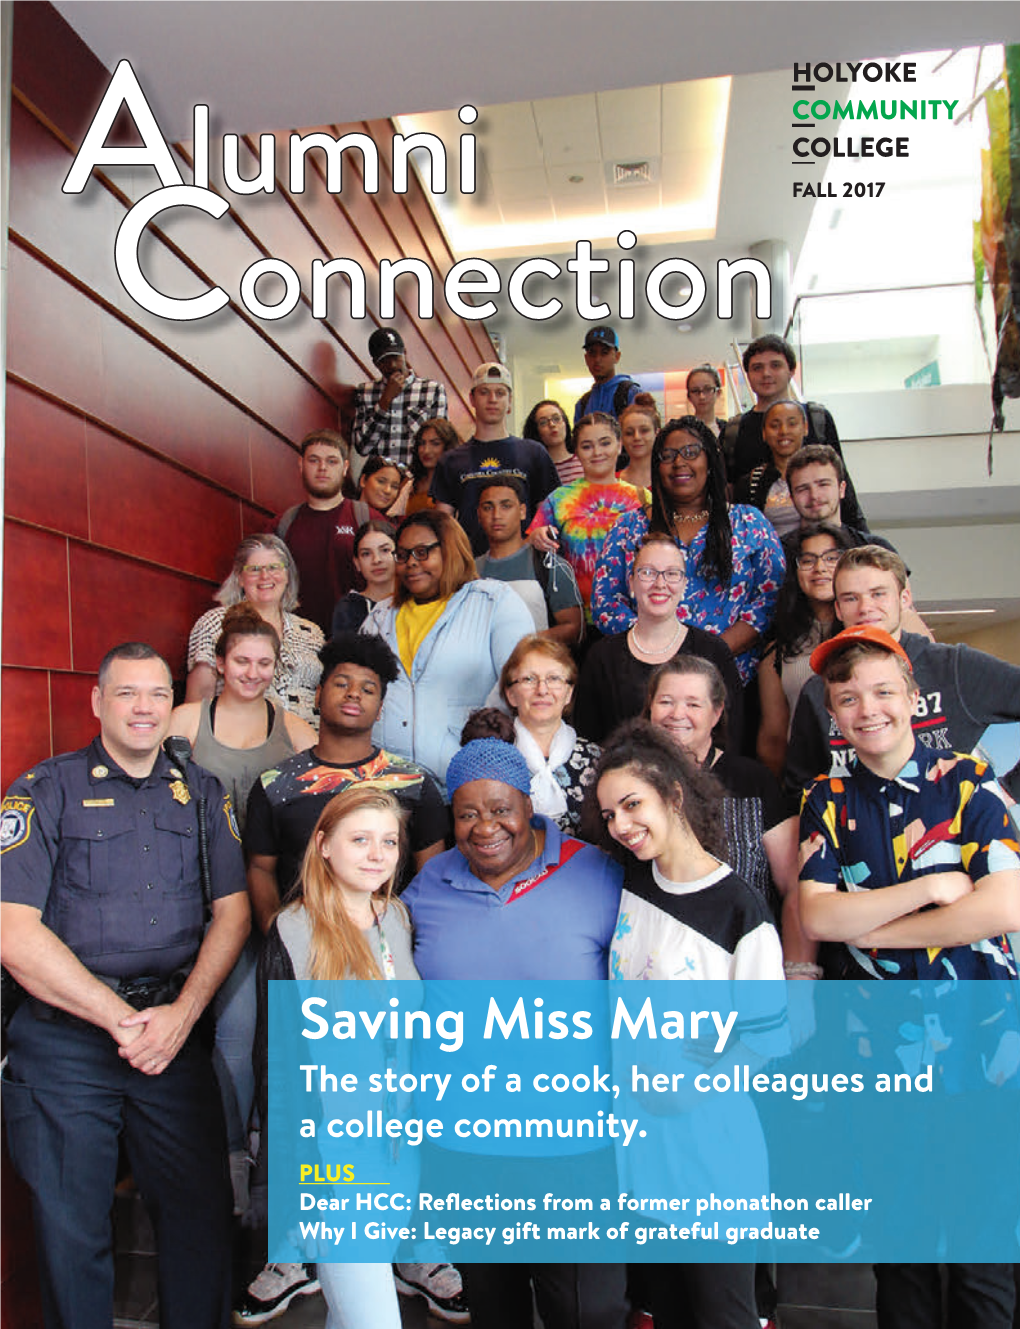 Saving Miss Mary the Story of a Cook, Her Colleagues and a College Community